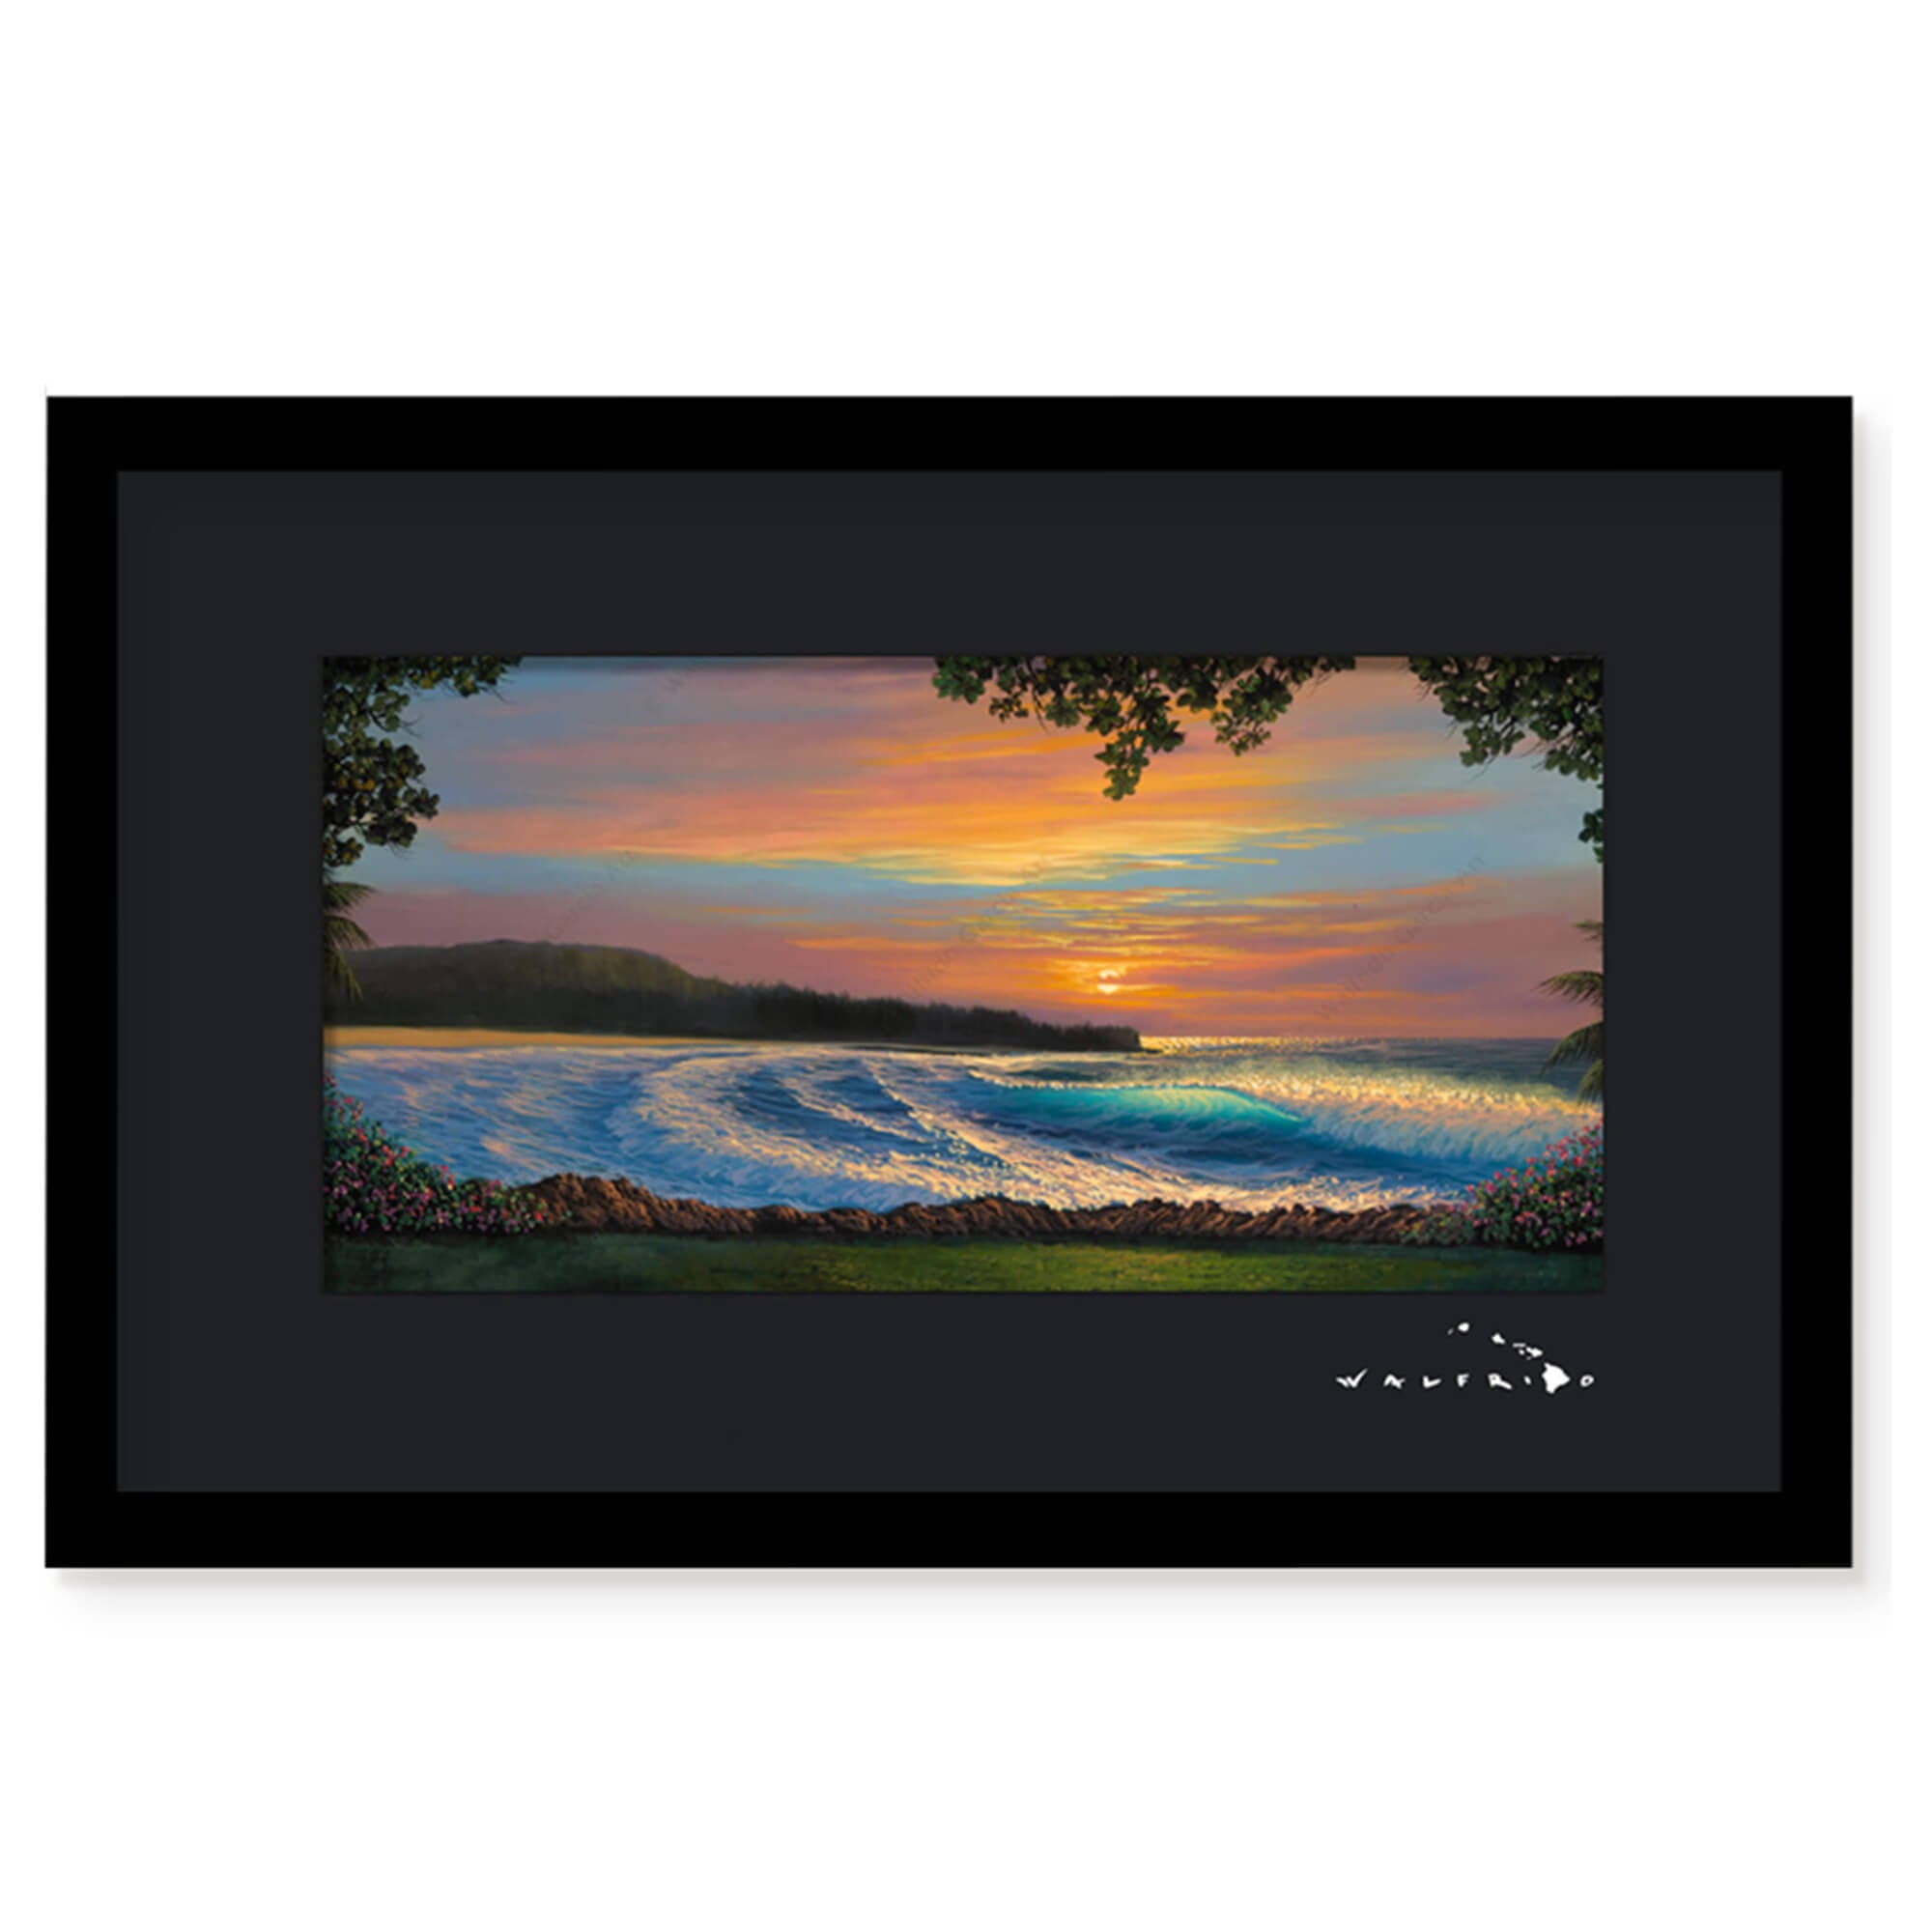 Framed matted art print of a beautiful view of the tropical scenery at Turtle Bay Resort on the island of Oahu by Hawaii artist Walfrido Garcia